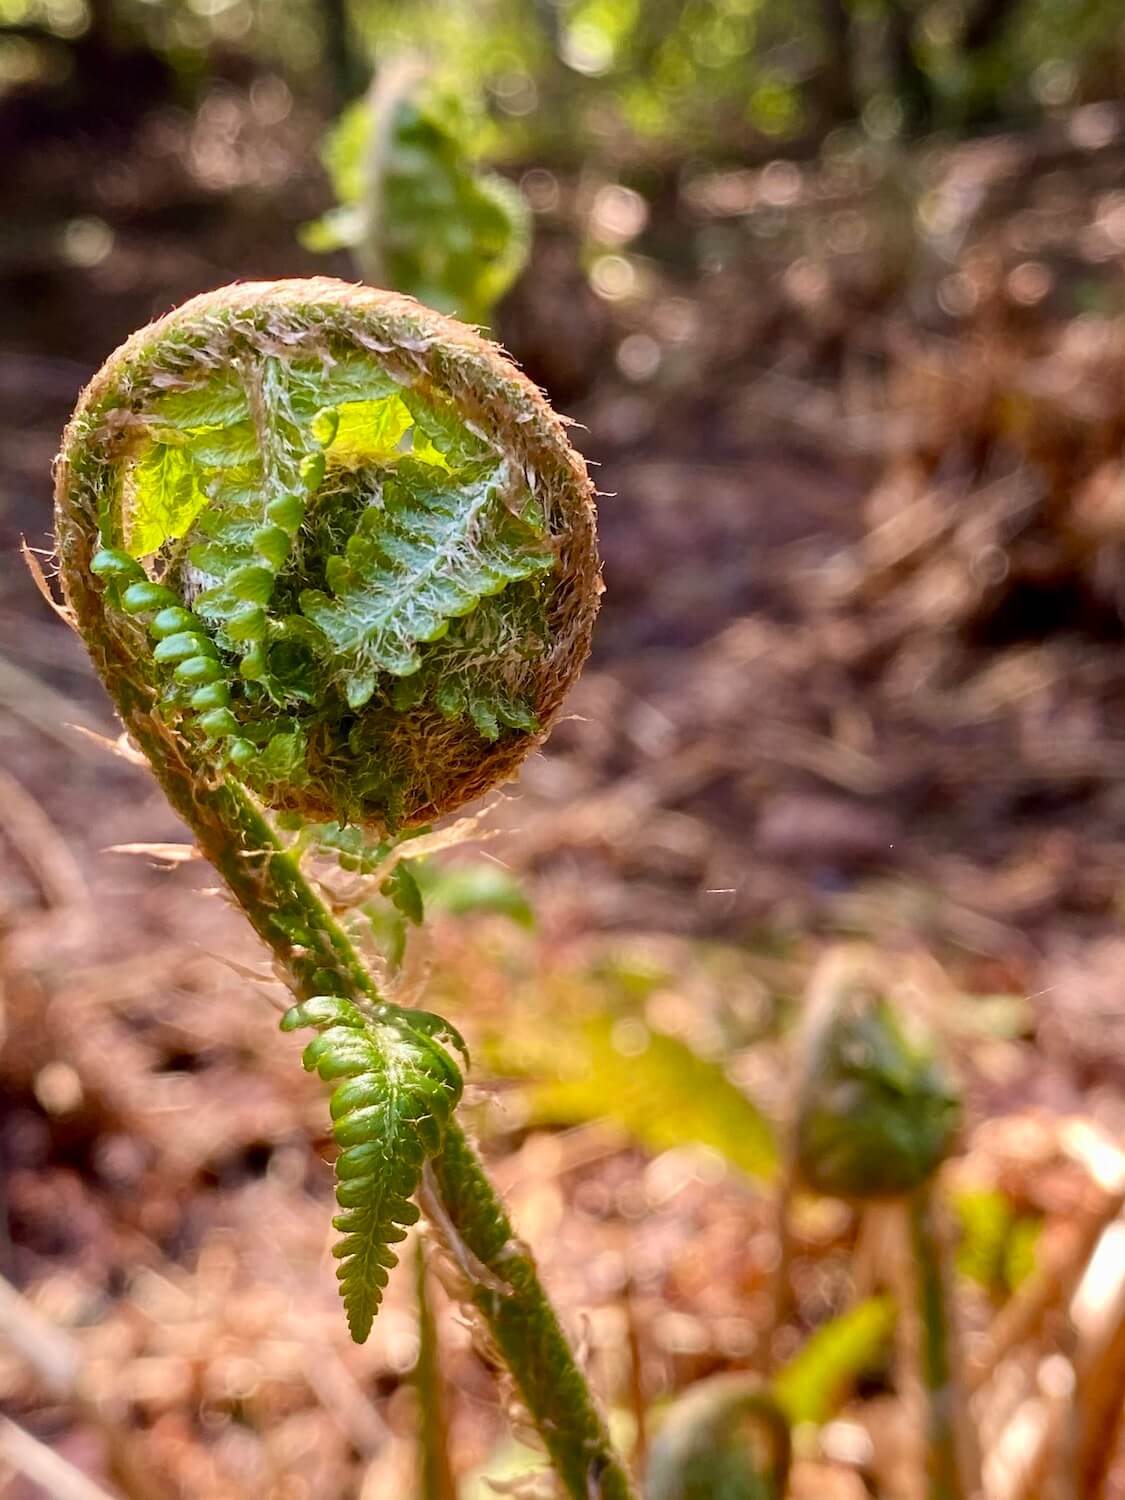 A fresh fiddlestick from a sword fern starting to unravel to produce a beautiful frond.  The light glows against the very delicate and thin ball of green matter.  The brown forest floor, still dormant, is blurred out in the background. 